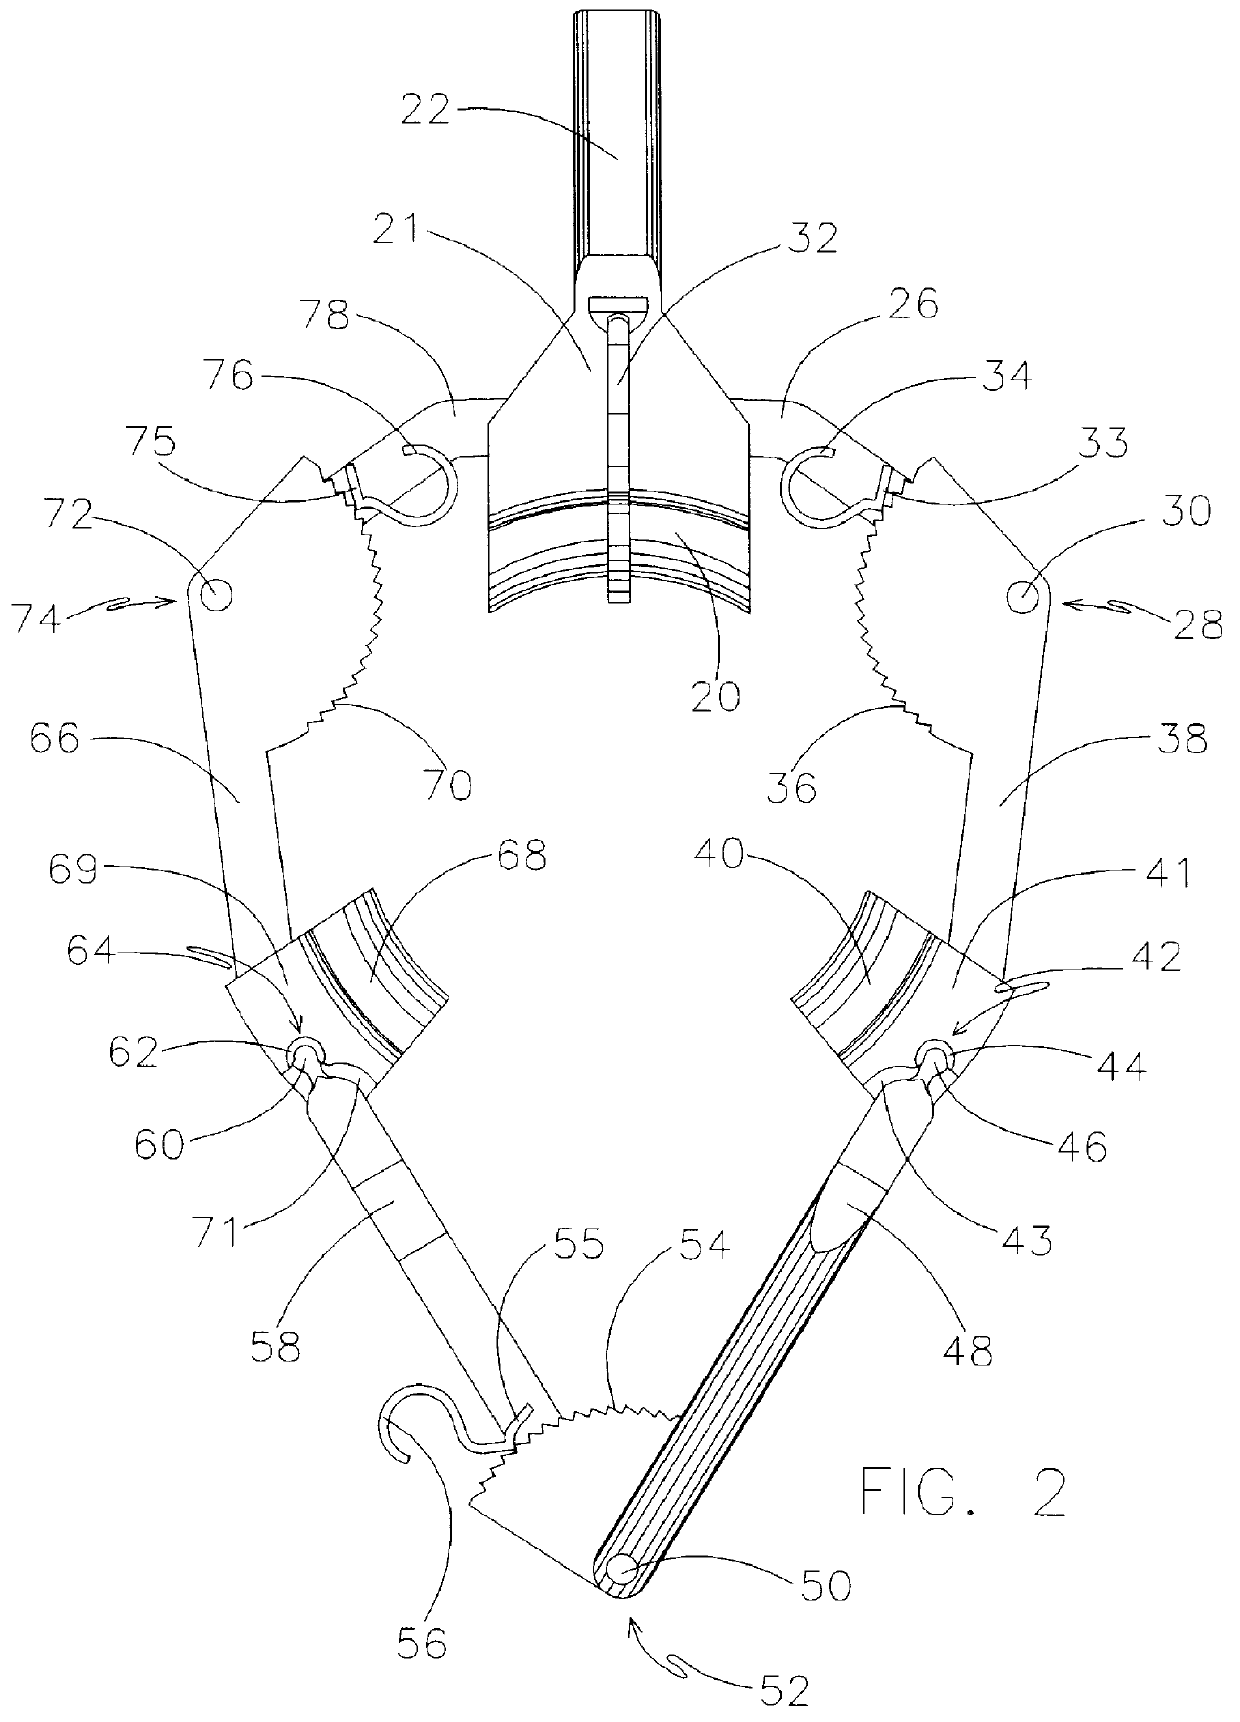 Multi-bladed speculum for dilating a body cavity